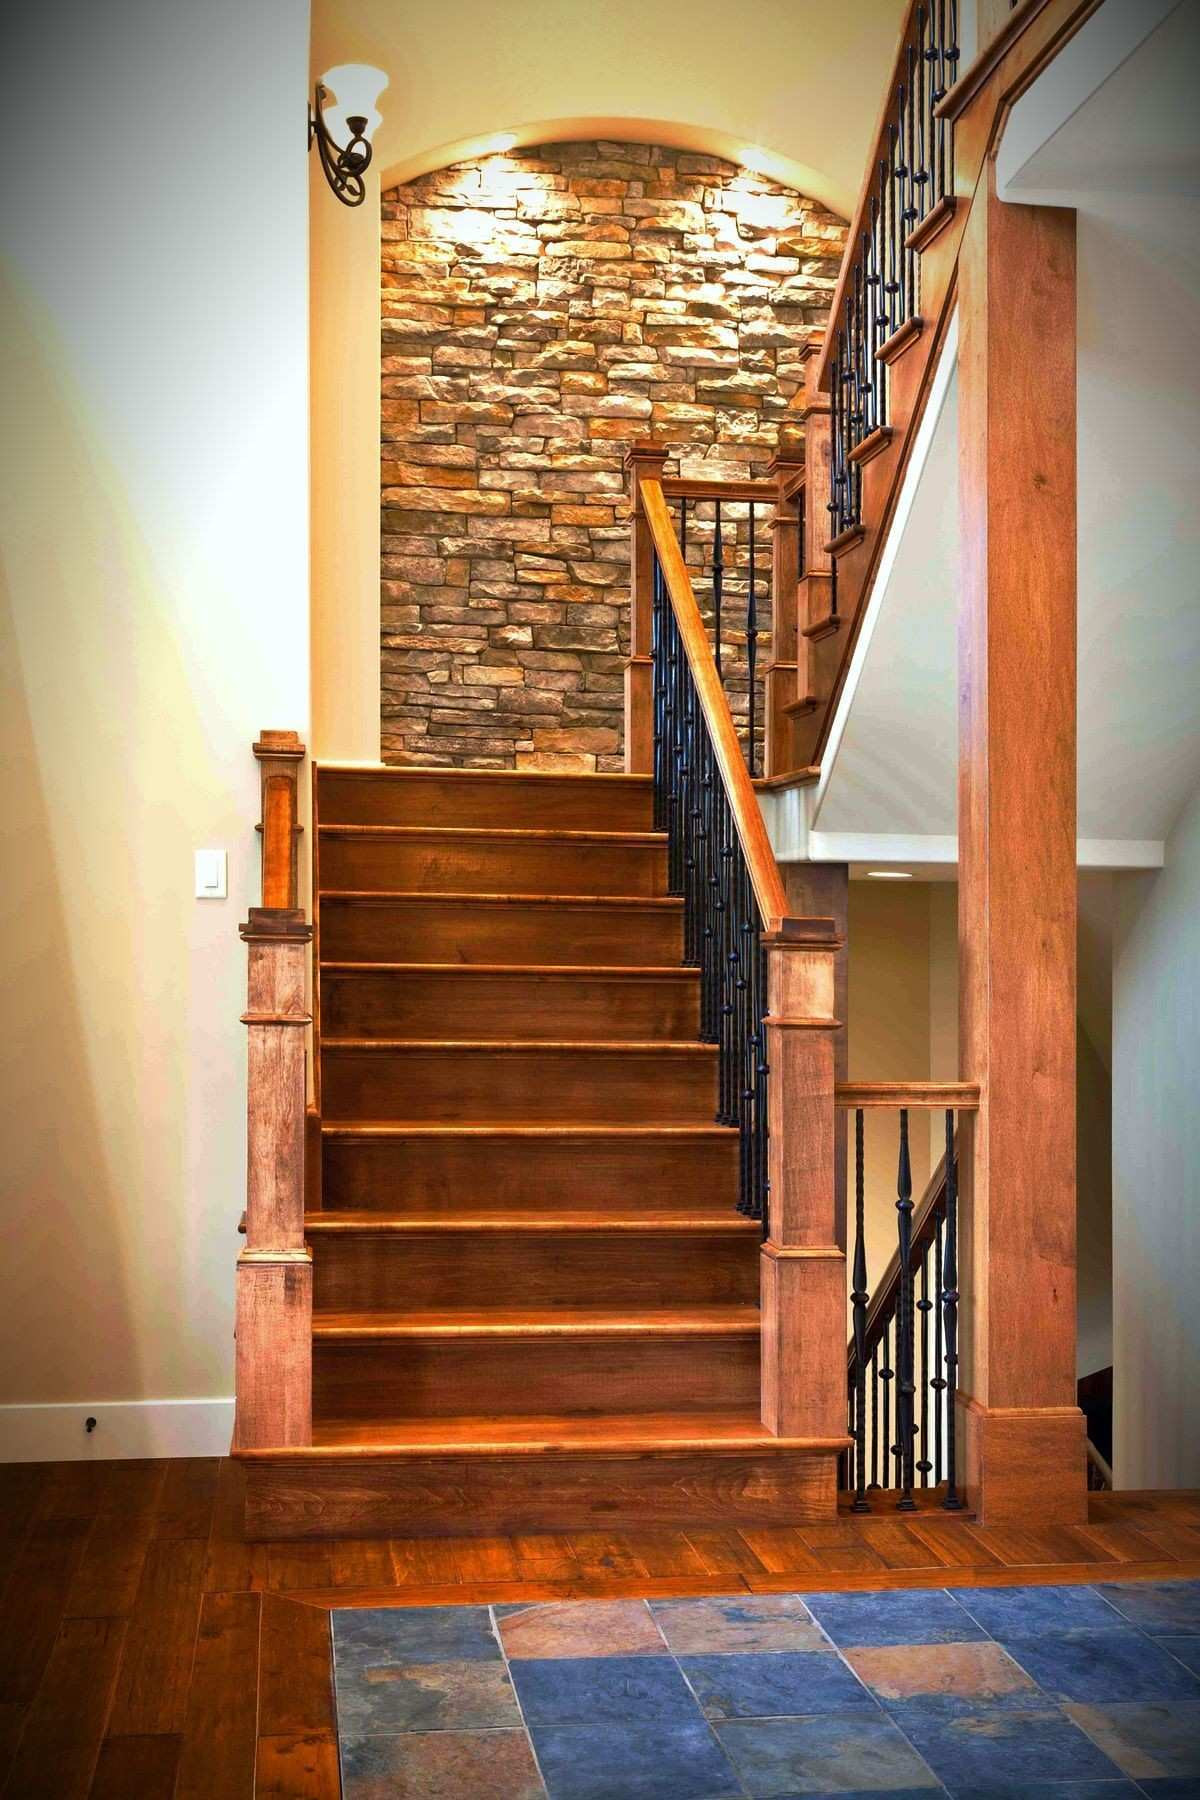 30 Stylish Hardwood Floor Stairs Images 2024 free download hardwood floor stairs images of stair wall decor luxury view of the stairs from the foyer a blend of intended for stair wall decor luxury view of the stairs from the foyer a blend of texture